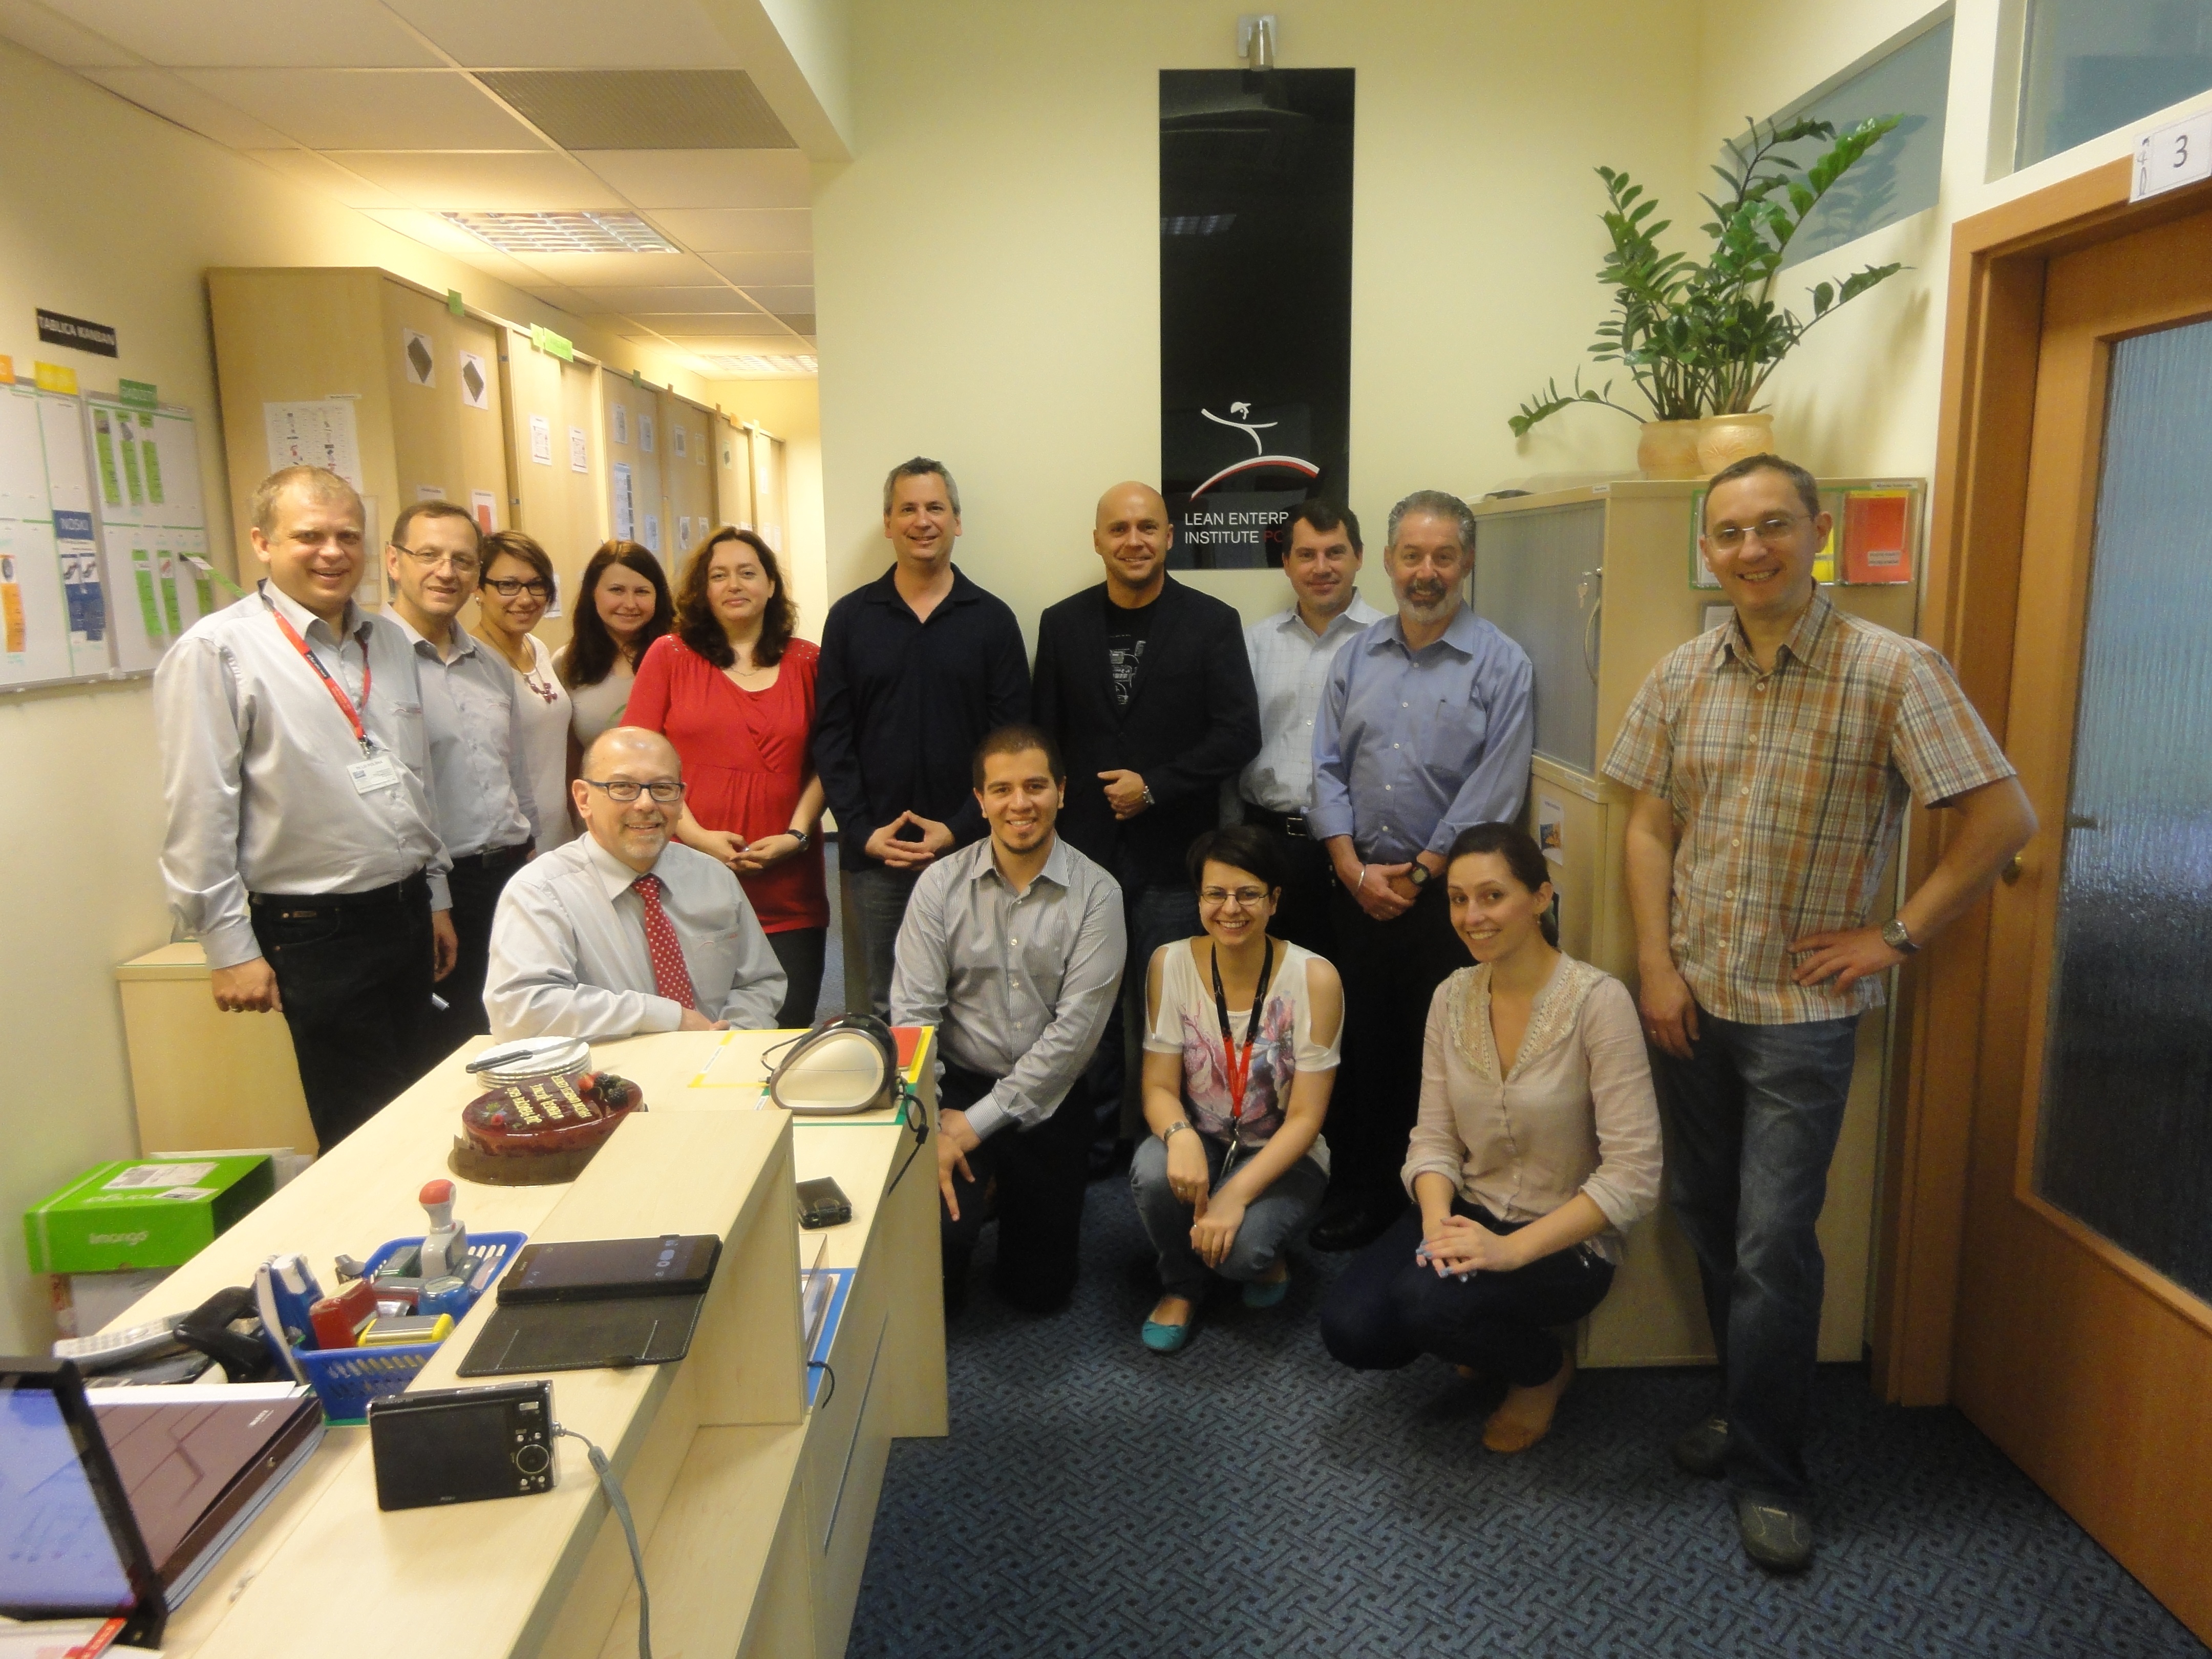 With the LEI Polska team at their office in Wroclaw.  Executive Director Tomasz Koch is kneeling at lower left.